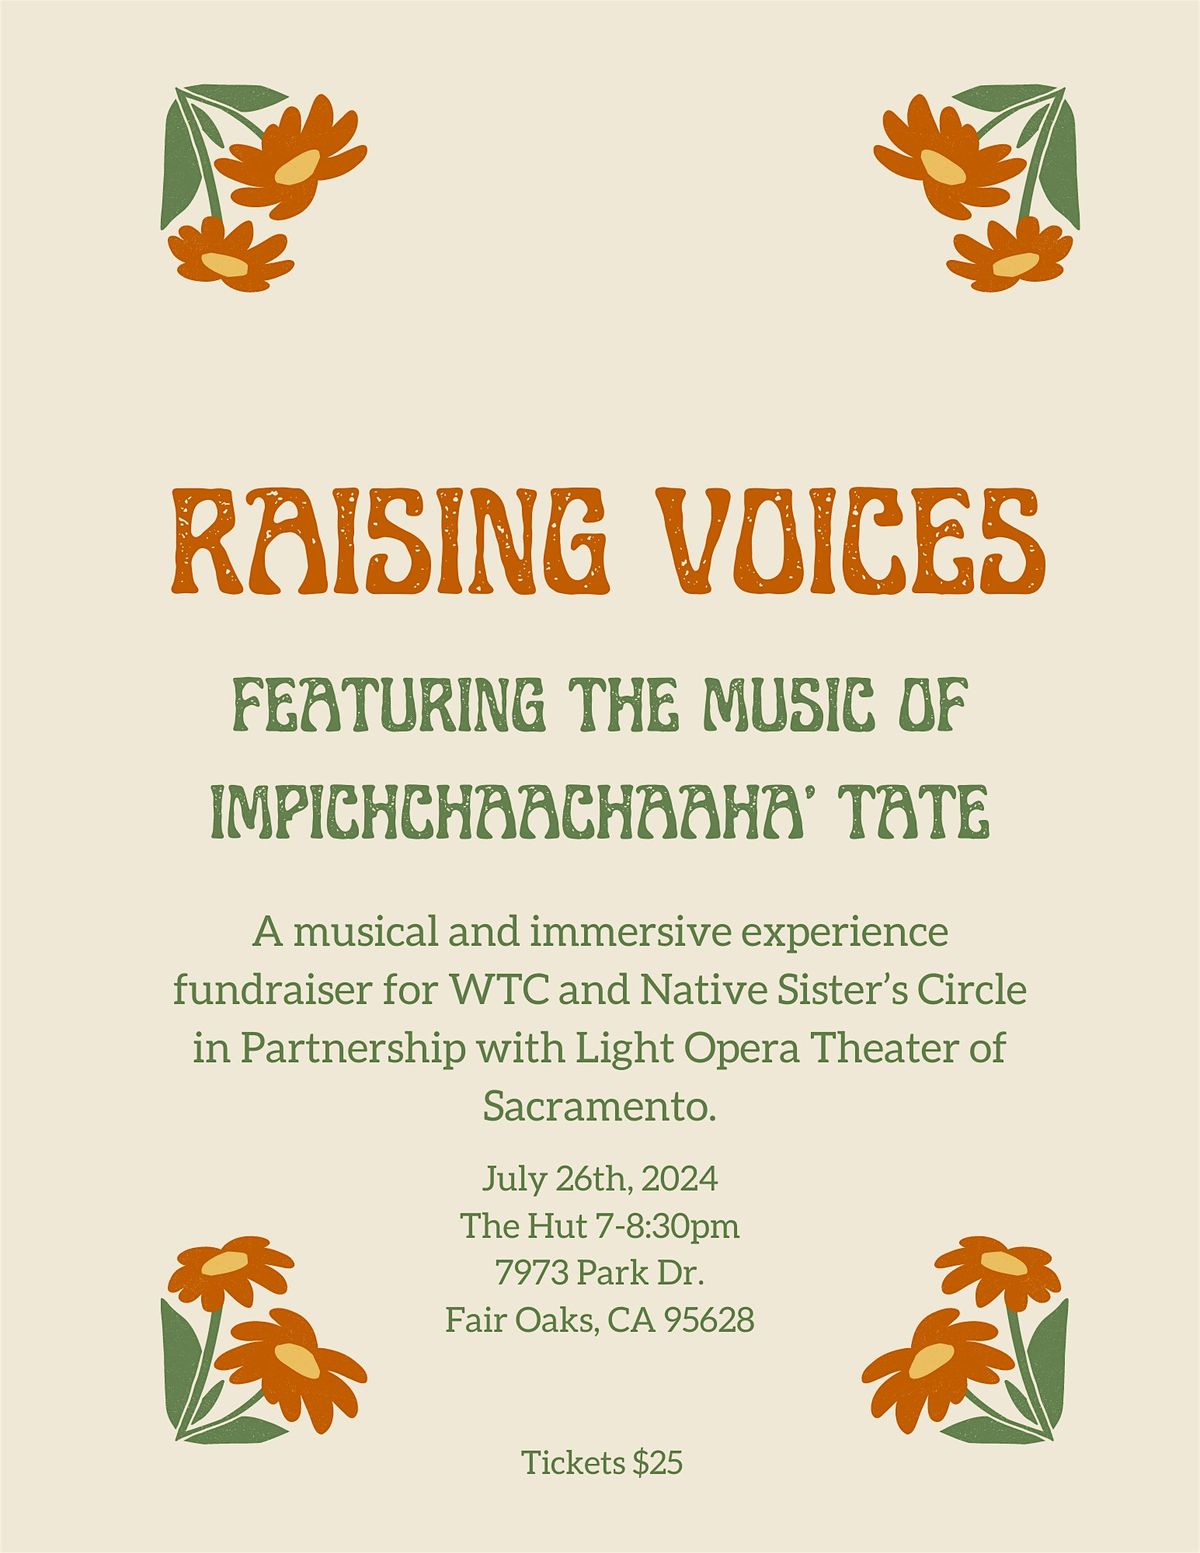 Raising Voices- Featuring The Music of Impichchaachaaha' Tate